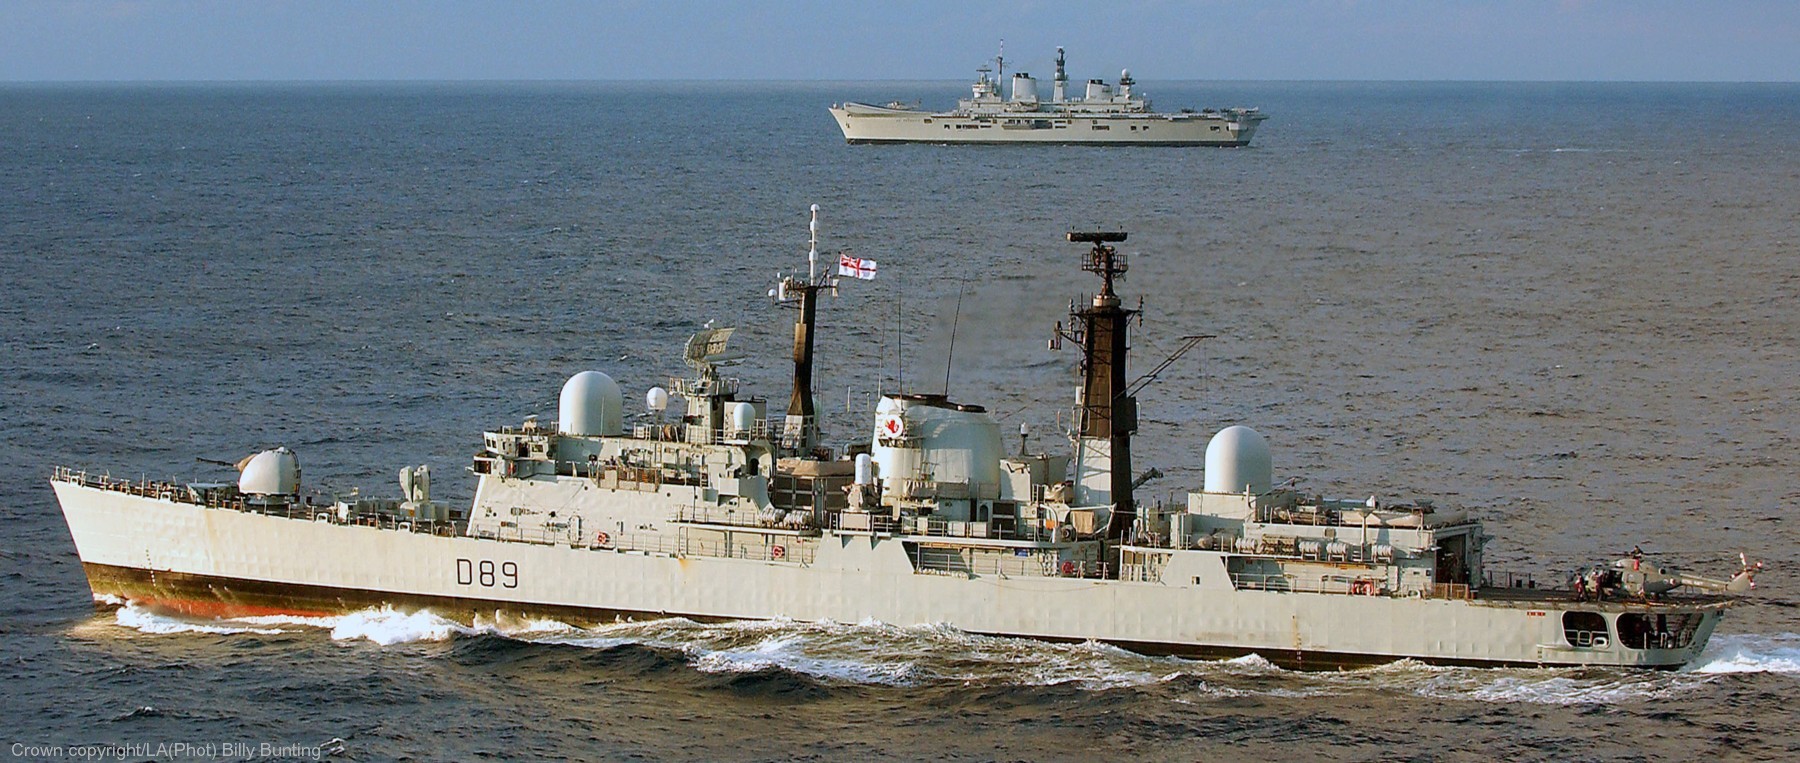 d 89 hms exeter type 42 sheffield class destroyer royal navy